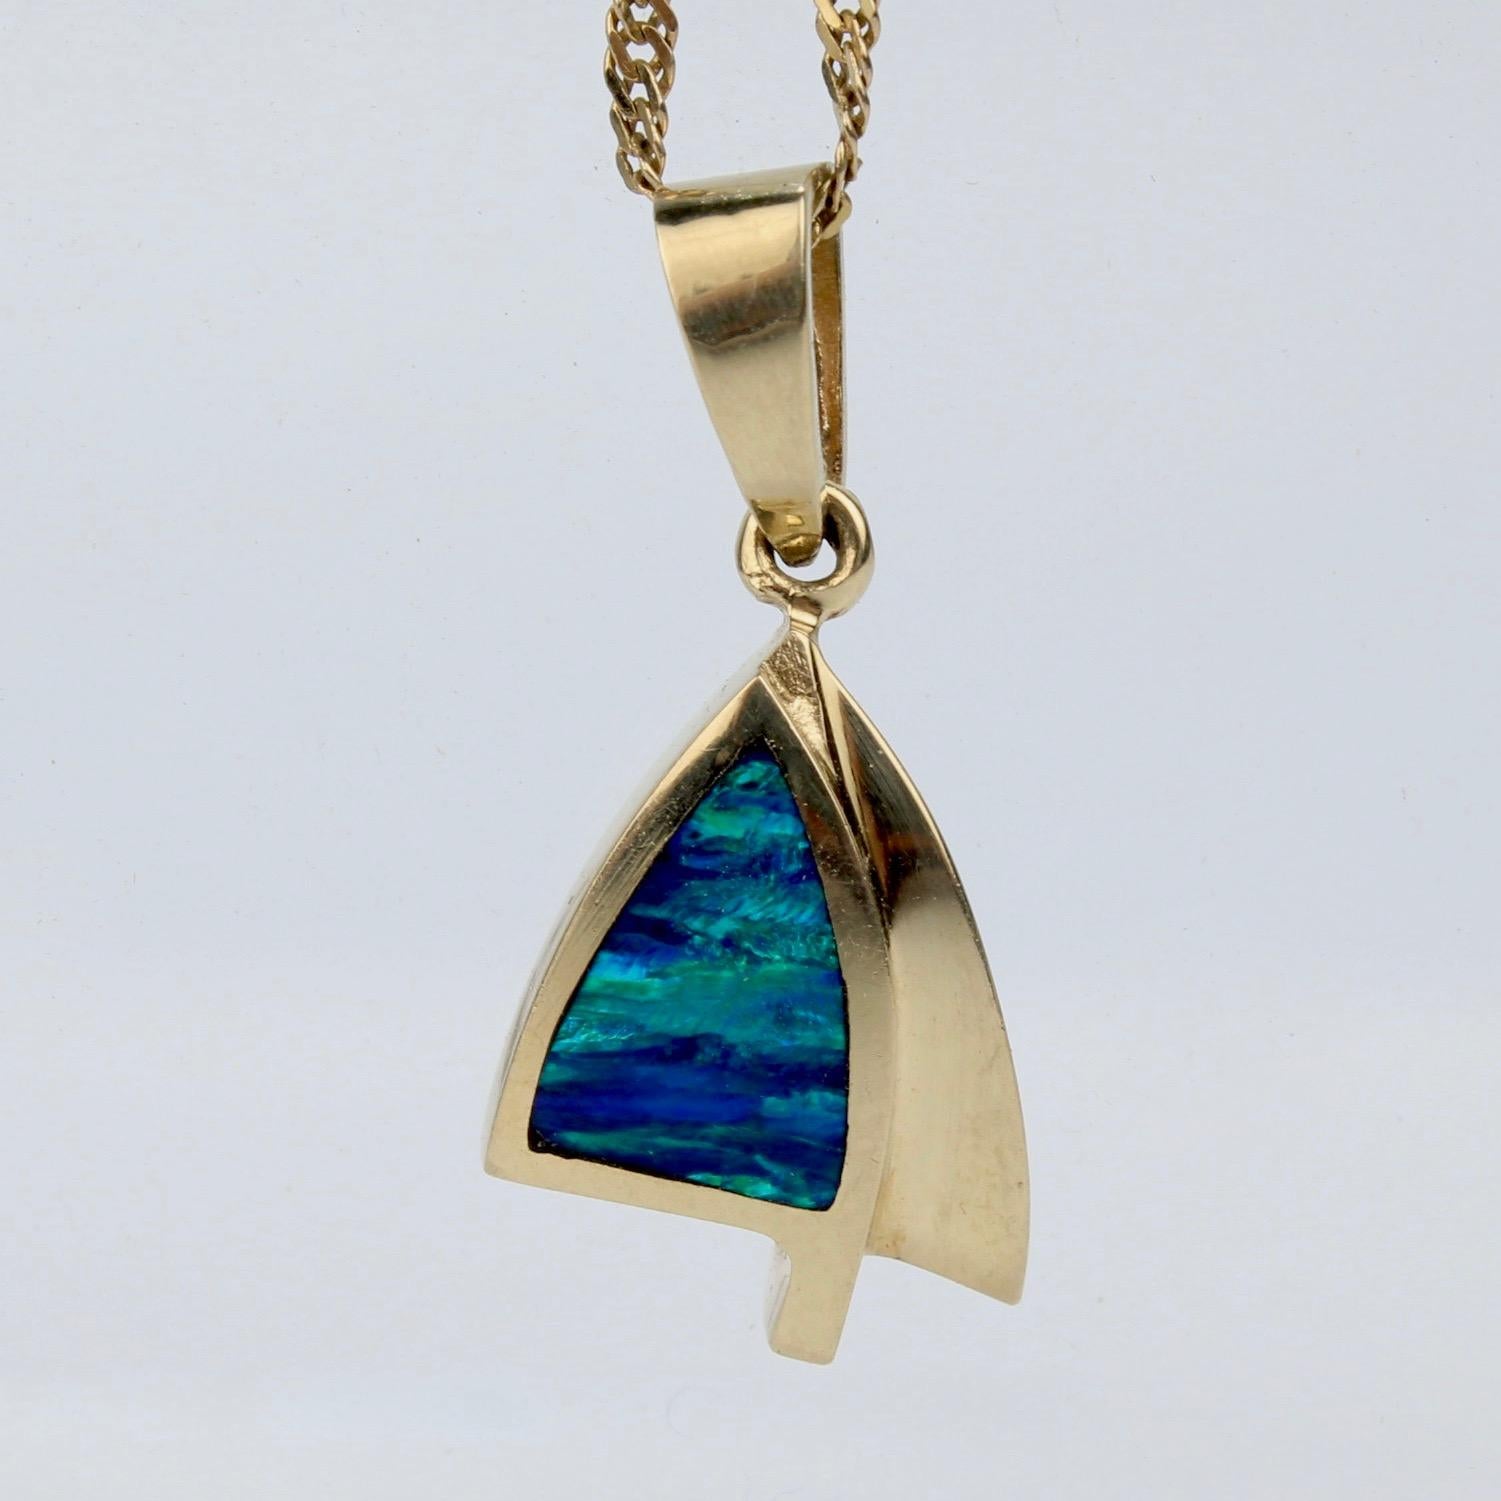 A fun modernist pendant necklace reminiscent of a sailboat's sail.

In 14k gold and set with an opal triplet at its center that reminds one of the sea.

Together with an associated twist chain necklace.

A fun, simple modernist necklace with a